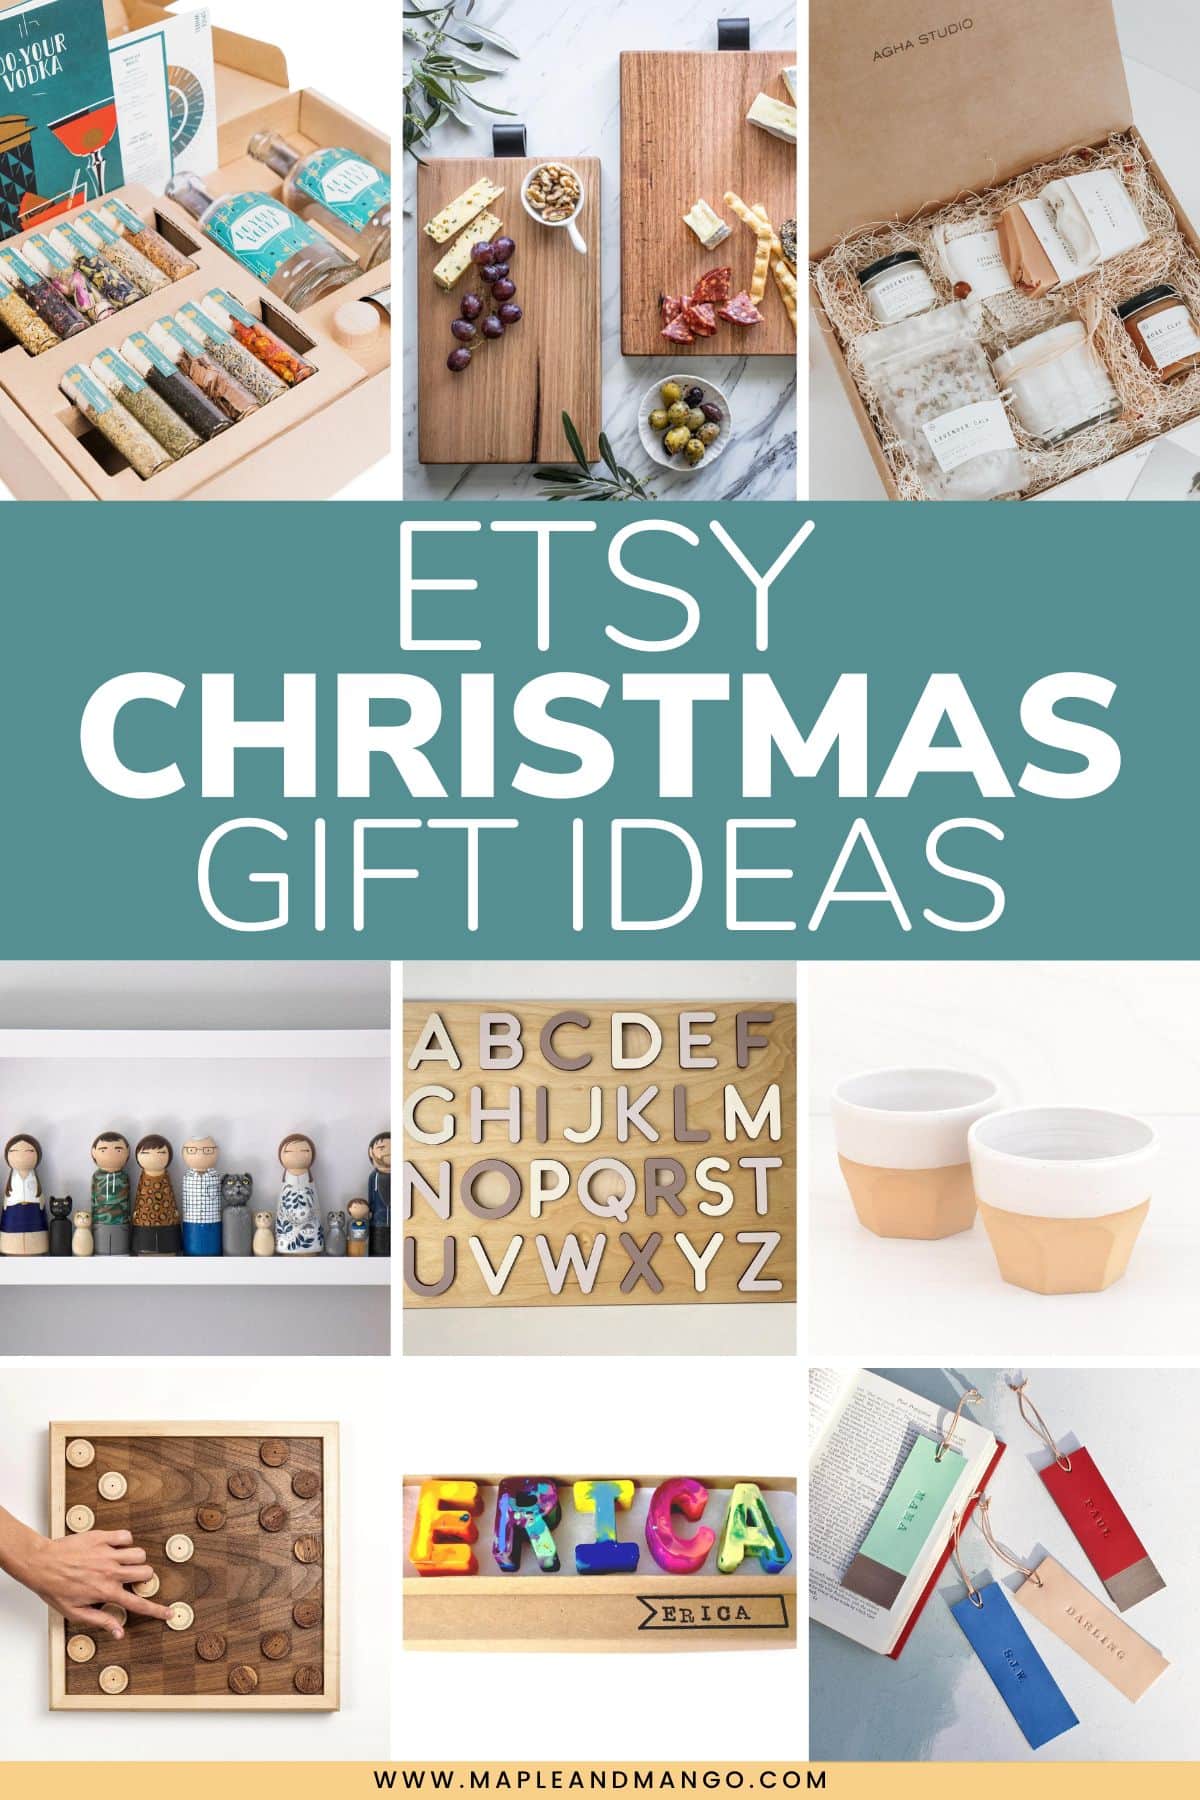 Photo collage of items found on Etsy with text overlay that reads "Etsy Christmas Gift Ideas".